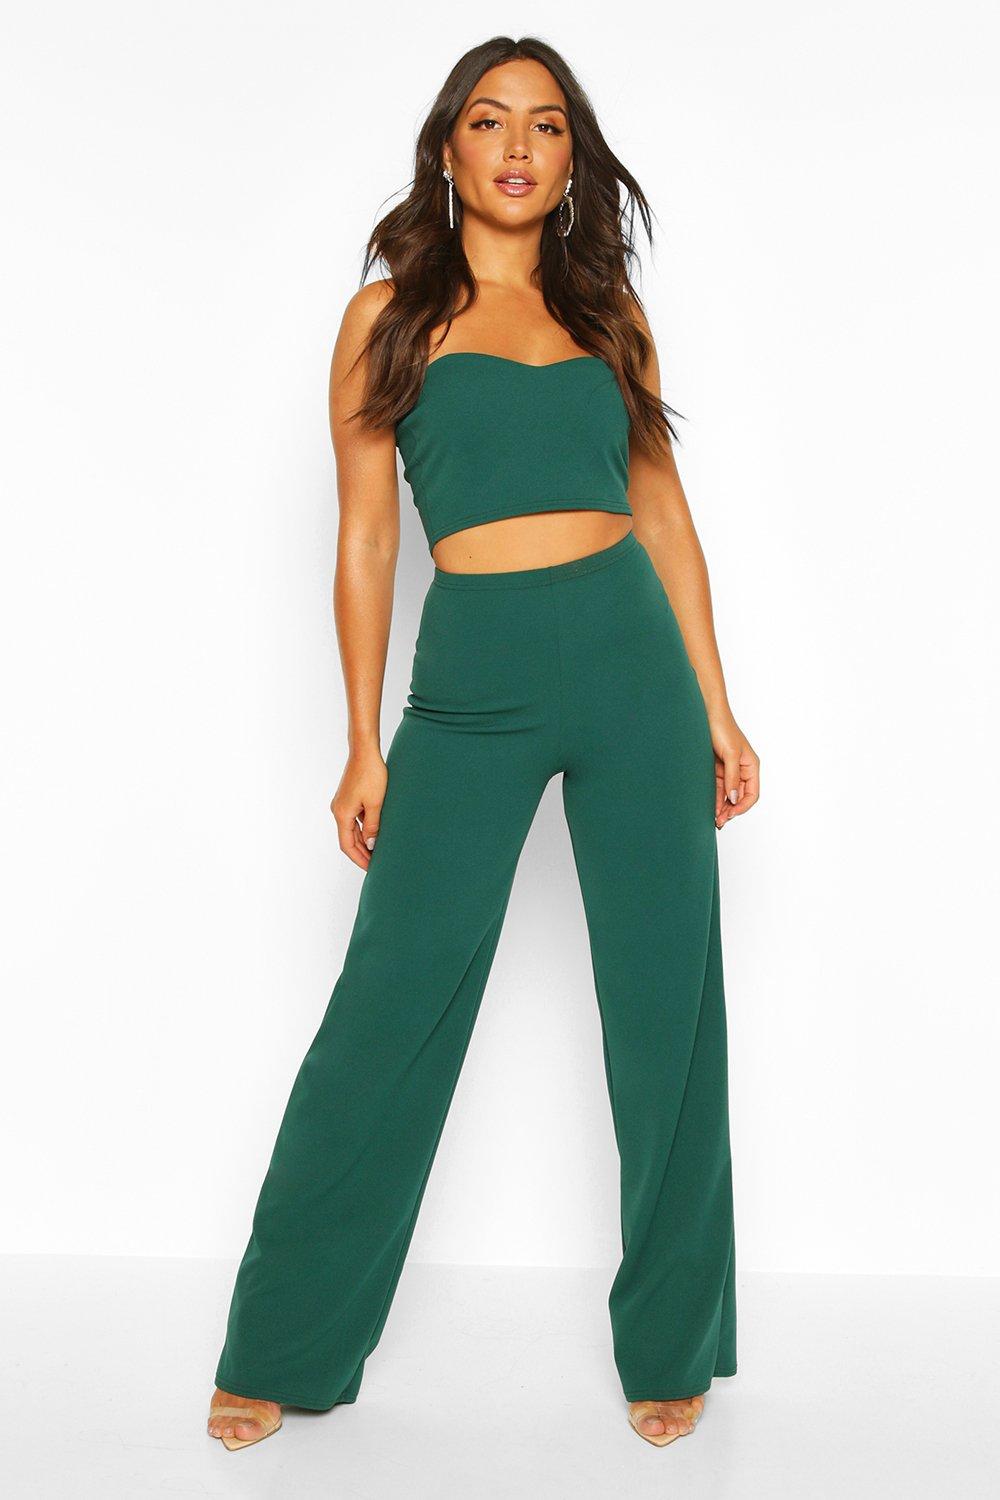 Womens Bandeau Bralet And Wide Leg Trouser Co-Ord Set - Green - 6, Green